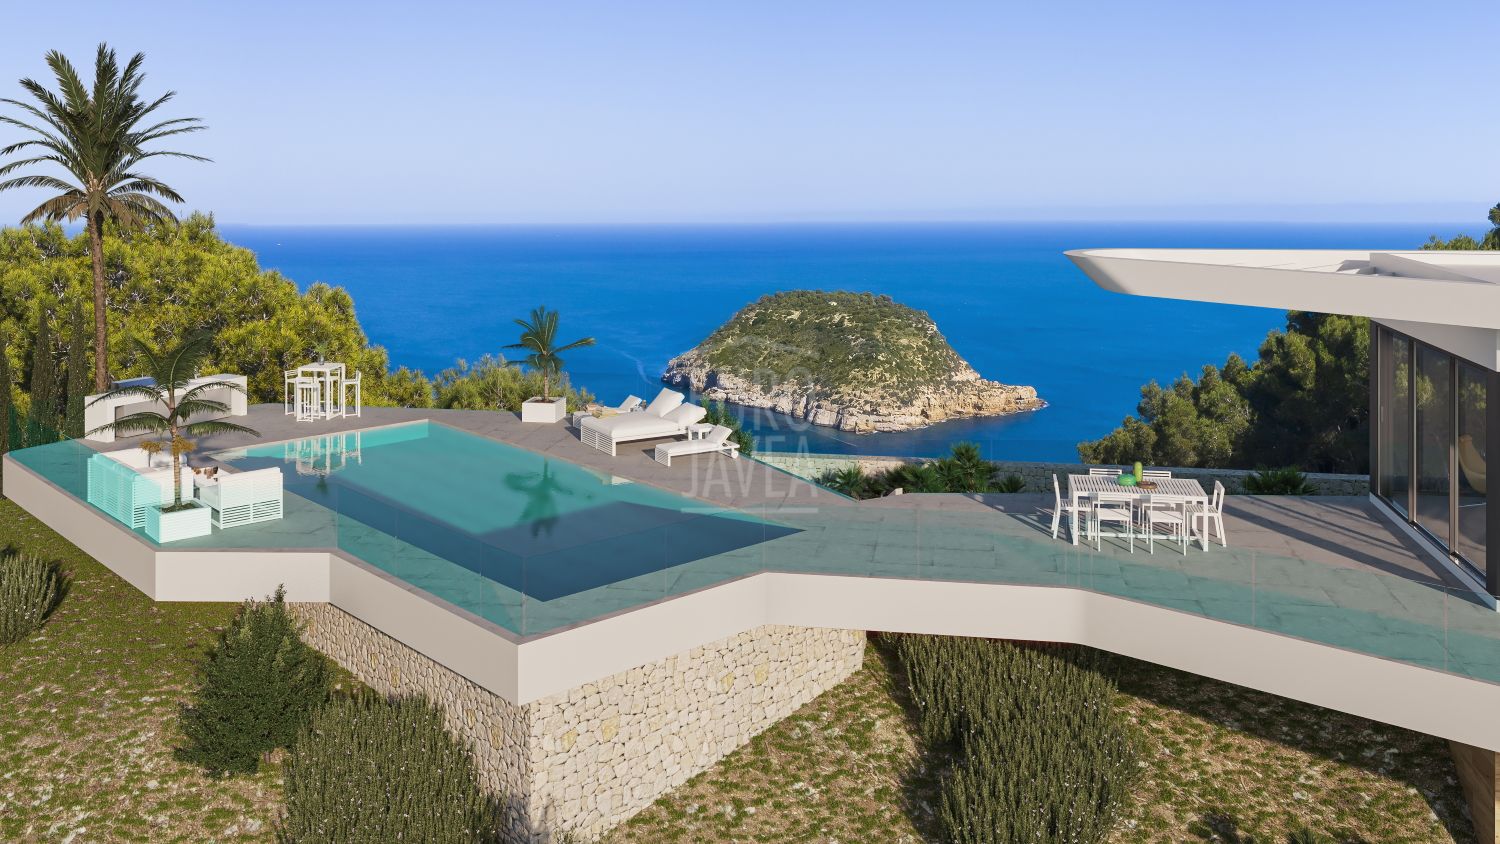 Single-family villa project in the Portichol area in Jávea, with stunning views of the sea and the island of Portichol